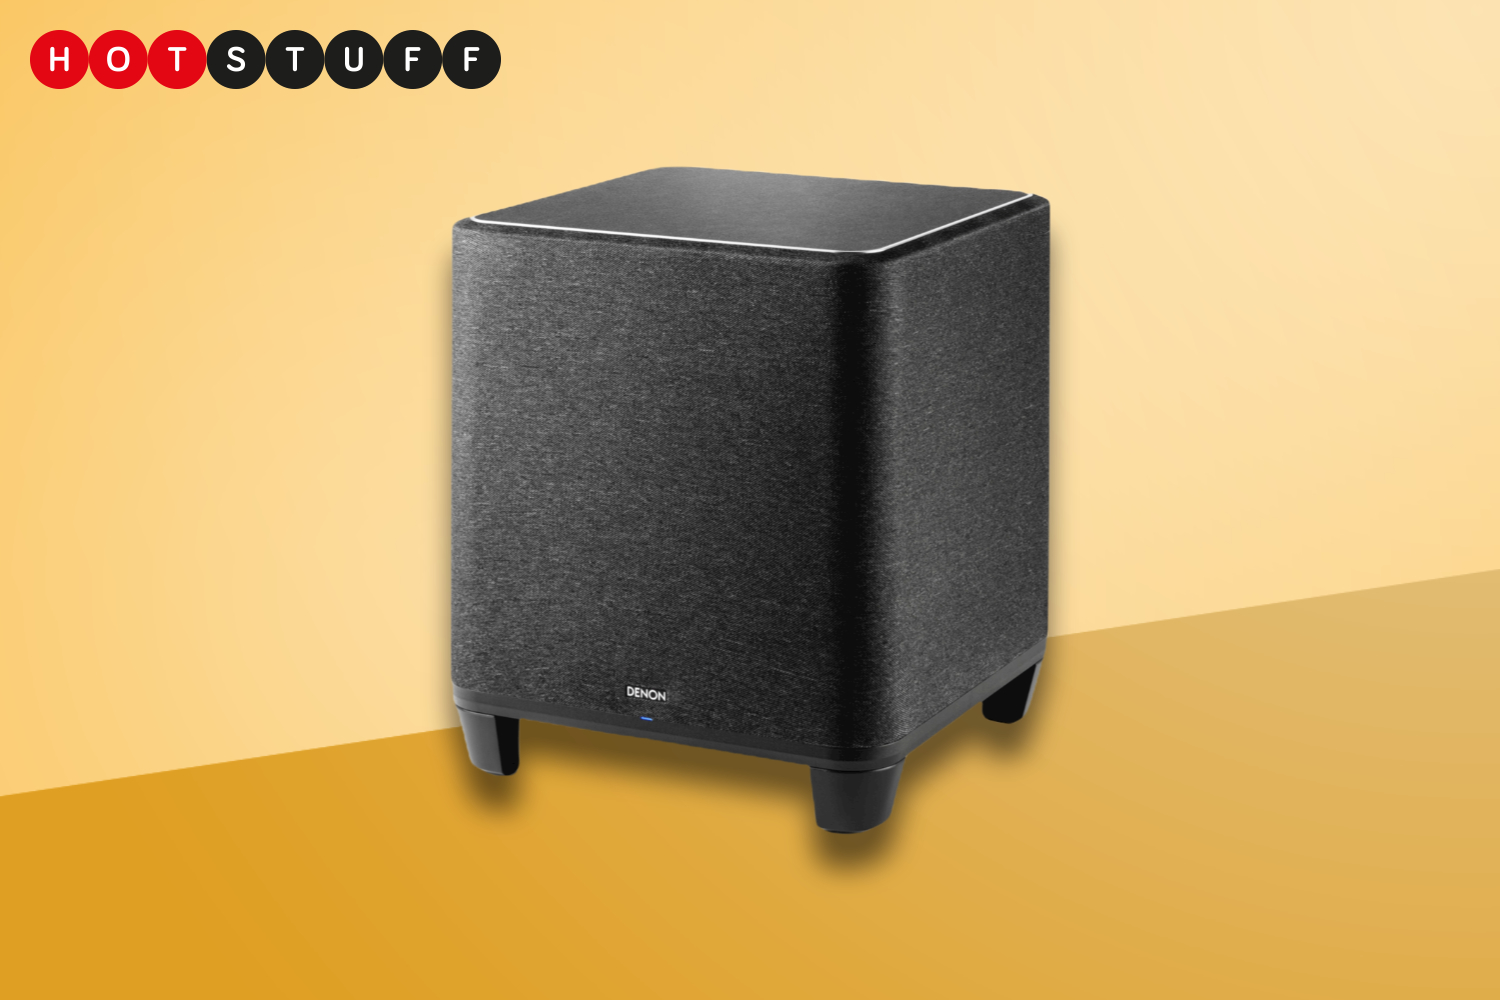 Denon\'s new wireless subwoofer promises add | entertainment to deep bass to your Stuff home